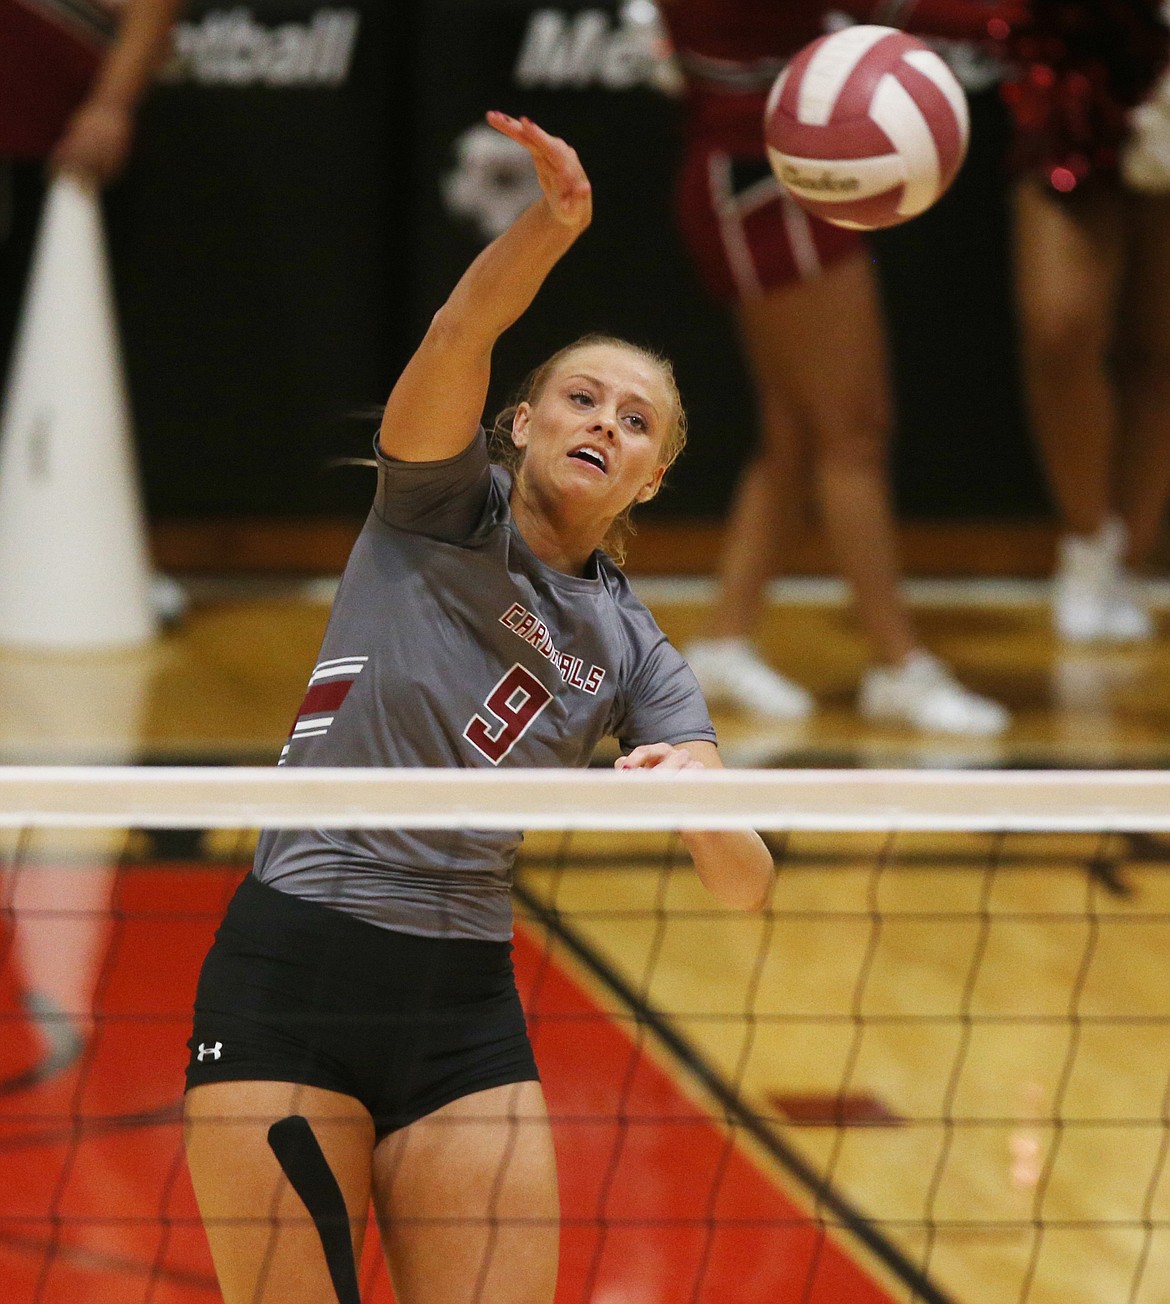 Kayla Neumann of North Idaho College hits a spike against Community Colleges of Spokane.